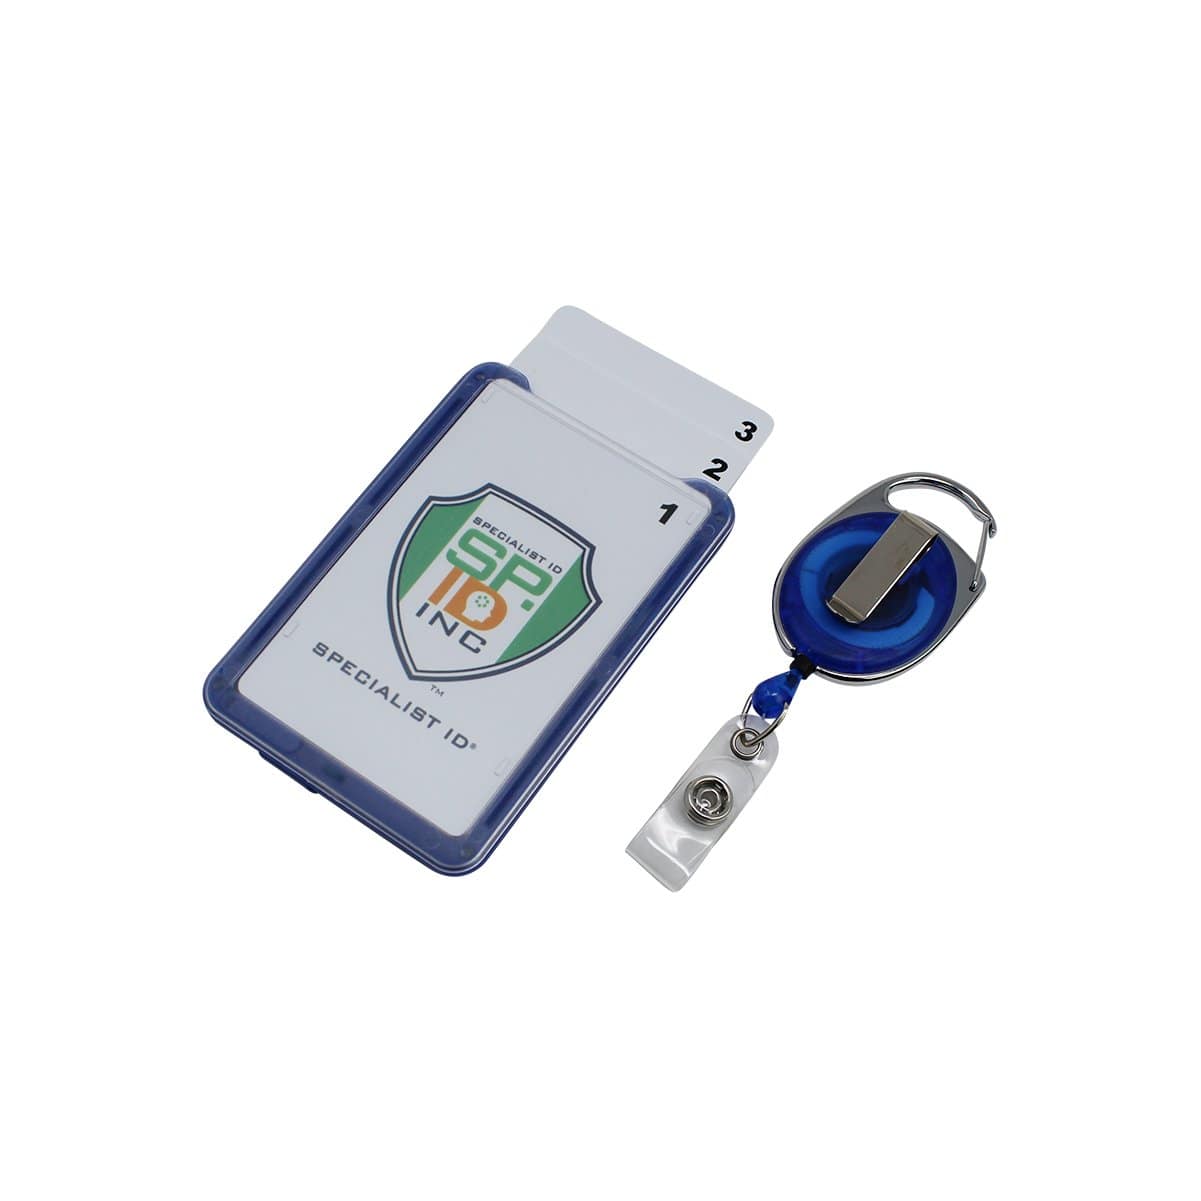 Hard Plastic 3 Card Badge Holder with Badge Reel - Retractable ID Lanyard Features Belt Clip &  Carabiner - Rigid Vertical CAC Holder - Top Load Holds Three Cards by SpecialistID